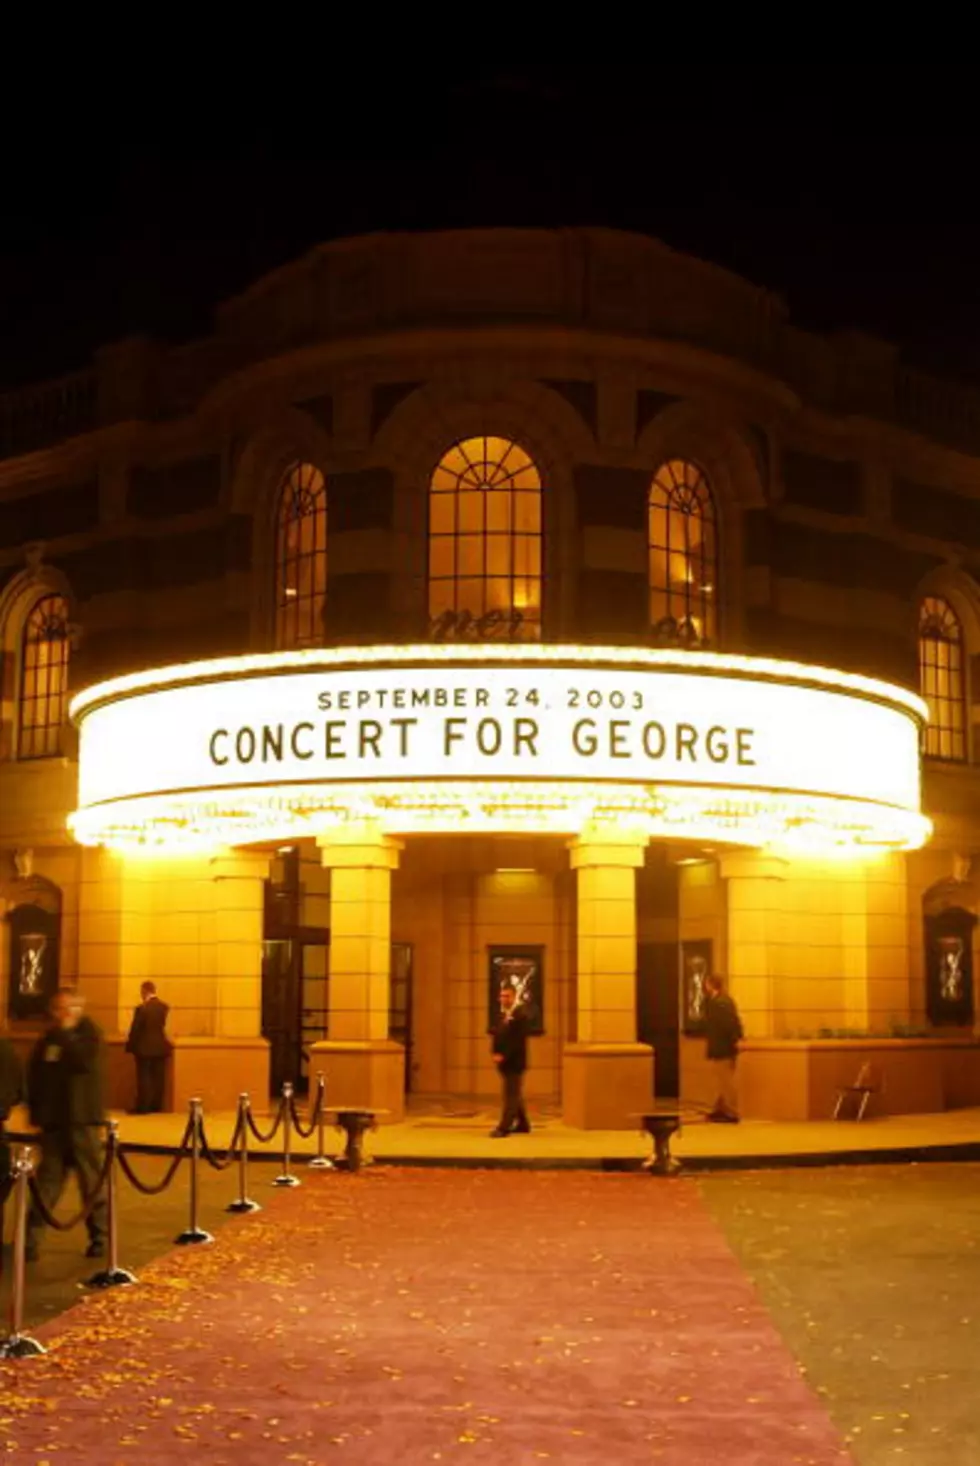 The Concert For George!